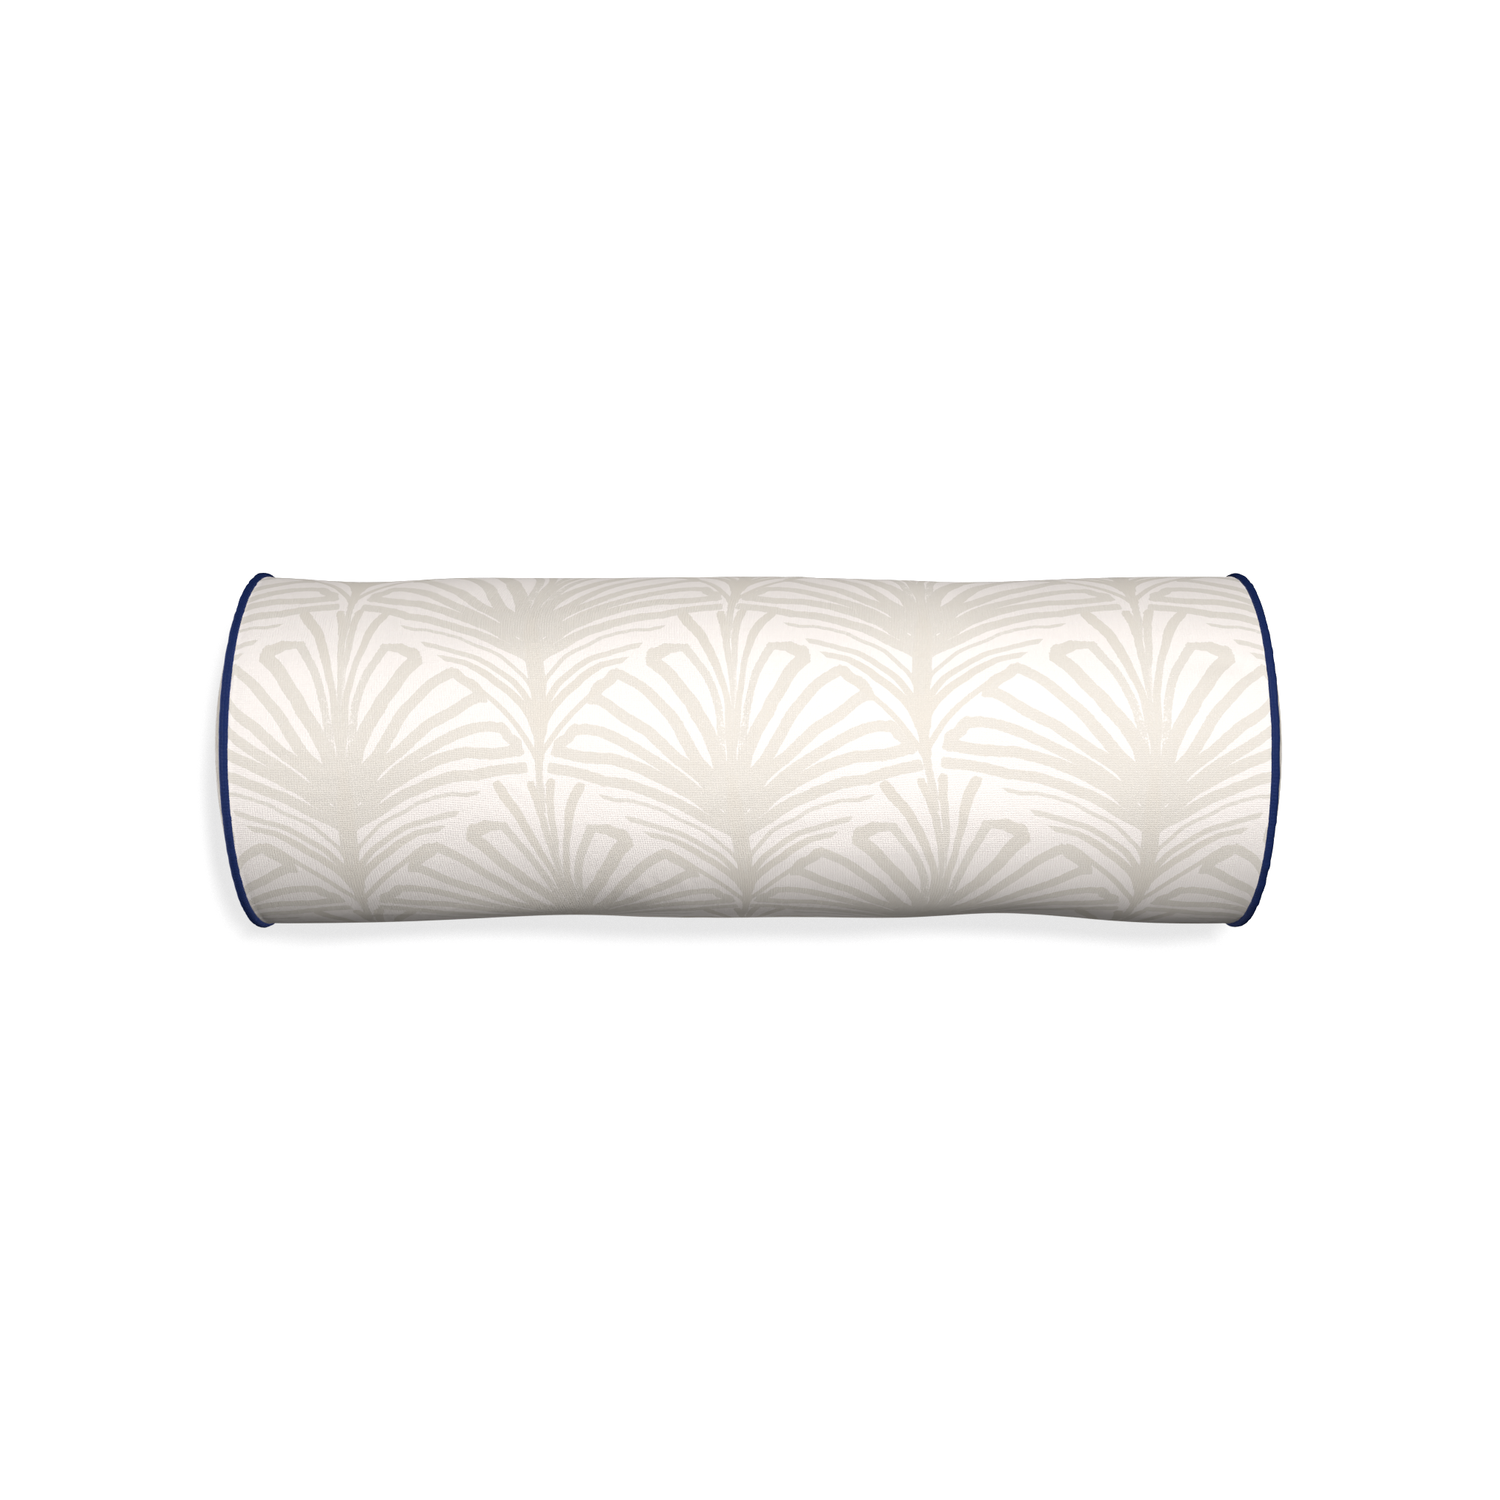 Bolster suzy sand custom beige palmpillow with midnight piping on white background